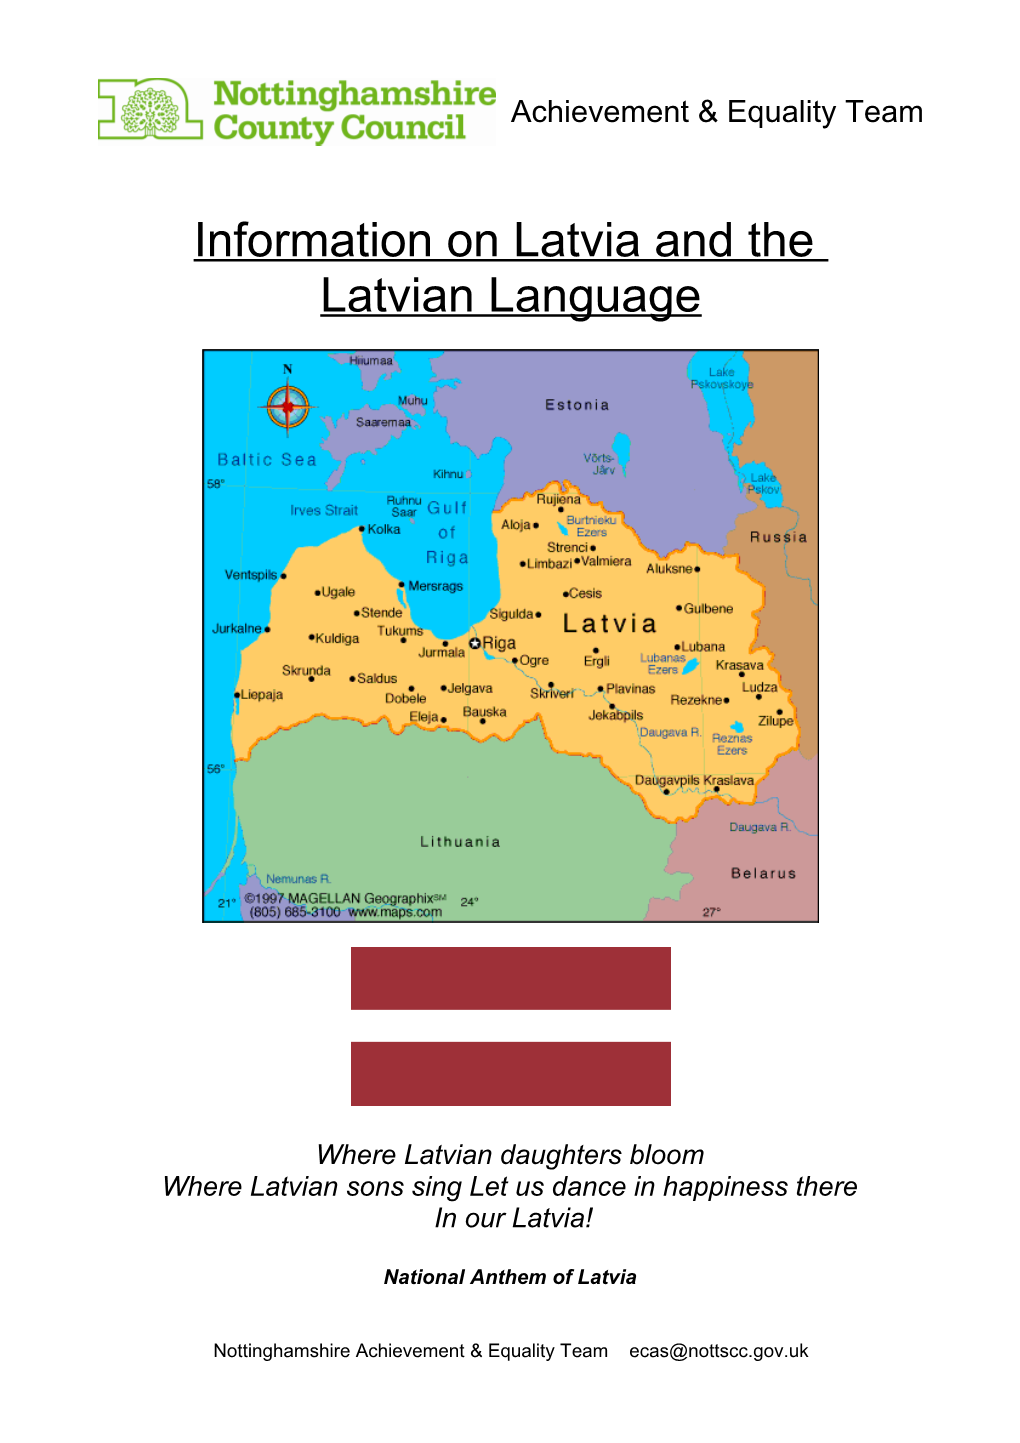 Information on Latvia and The